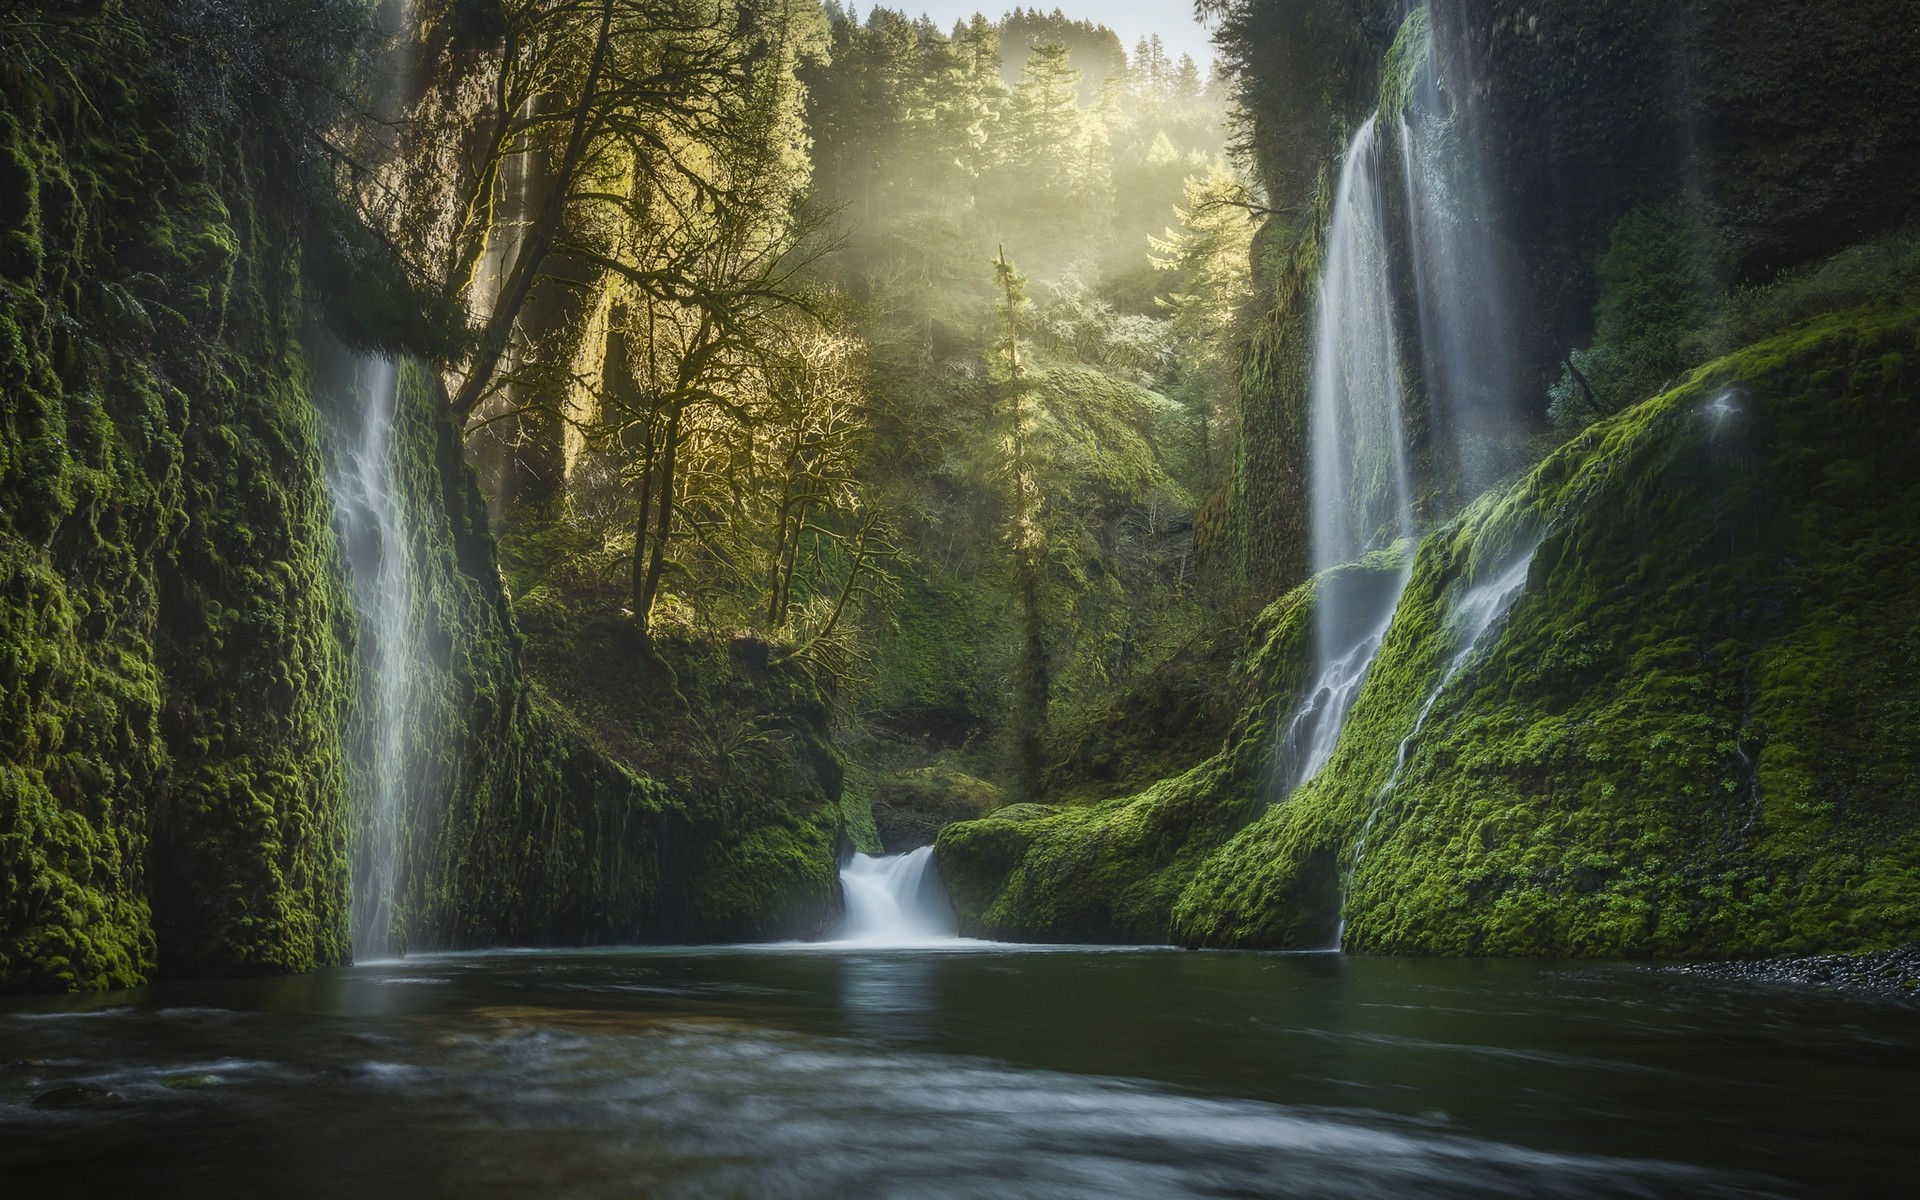 General 1920x1200 nature landscape Oregon waterfall moss forest mist USA pine trees water valley river